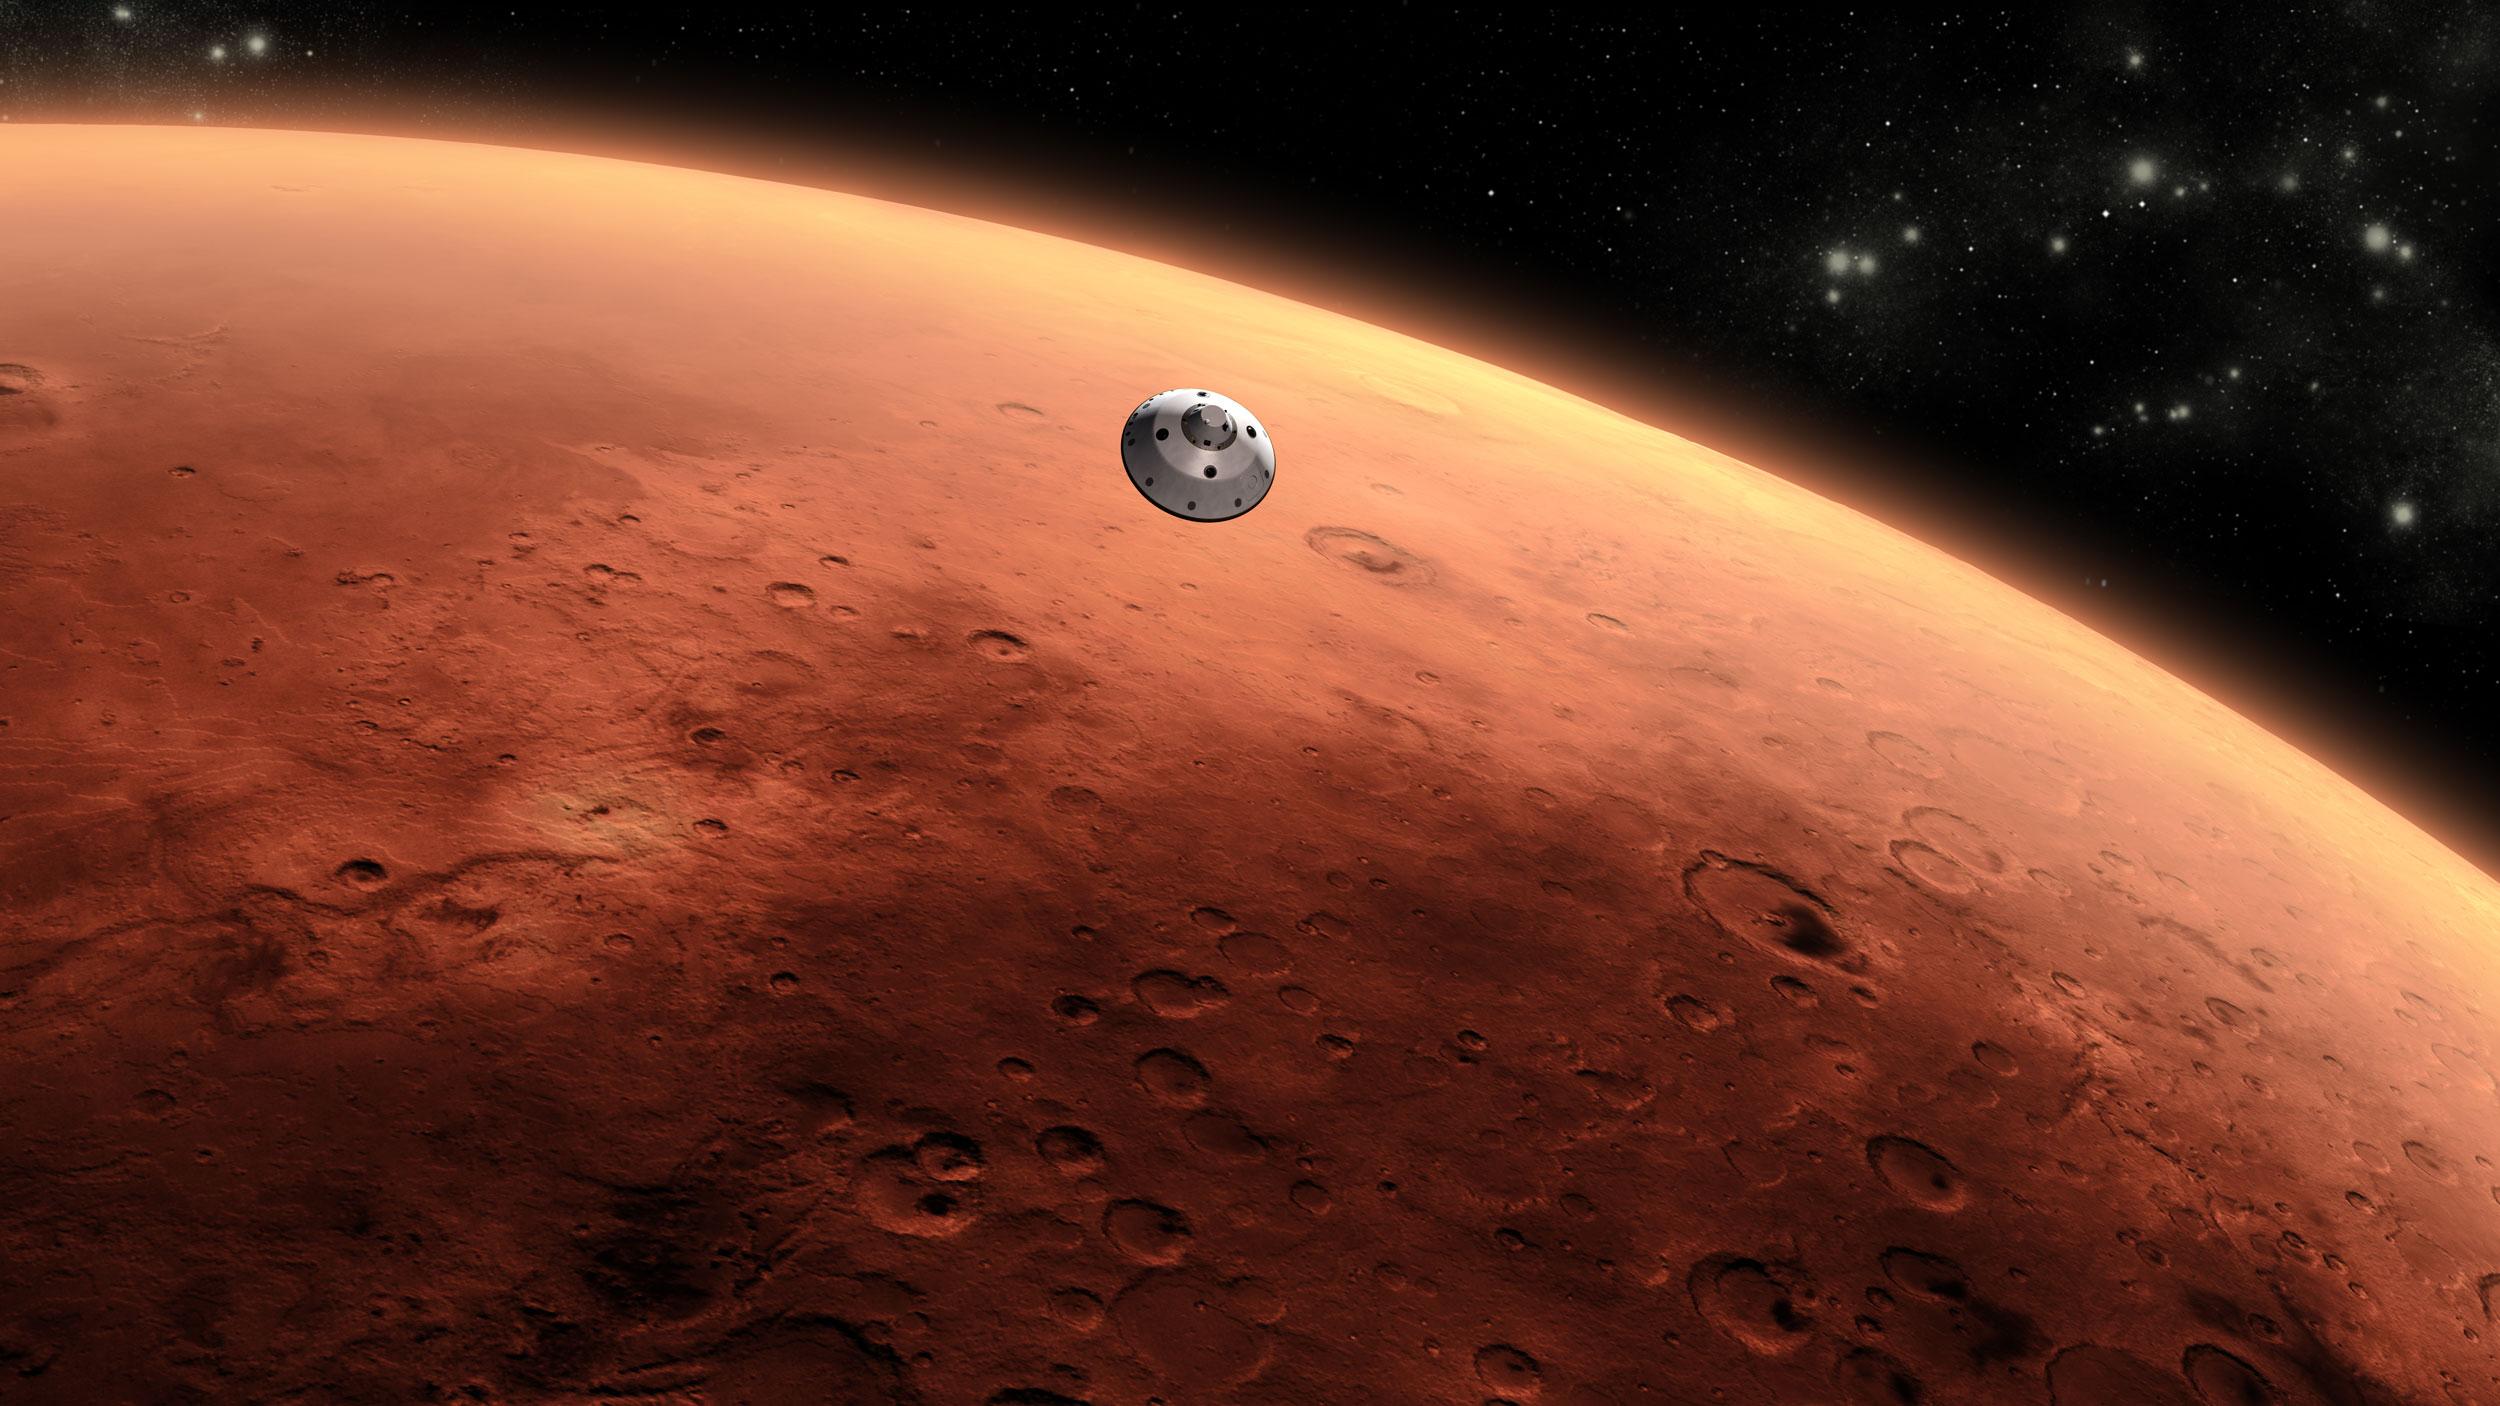 NASA is hiring a Planetary Protection Officer, but it’s not Earth that needs saving